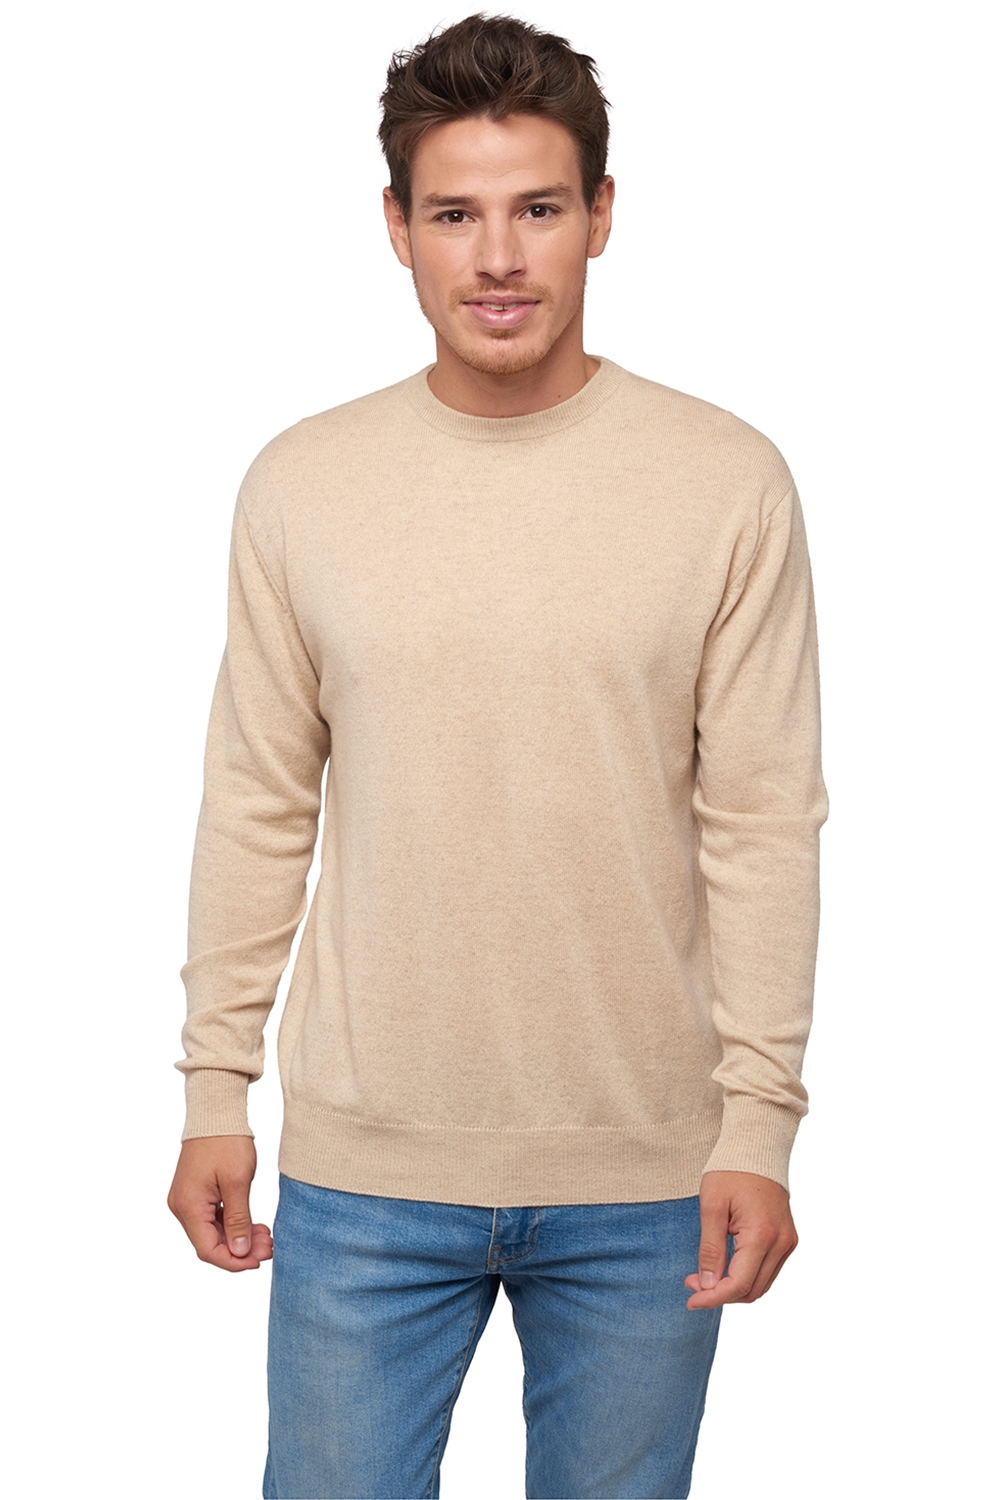 Cachemire Naturel pull homme natural ness 4f natural beige m